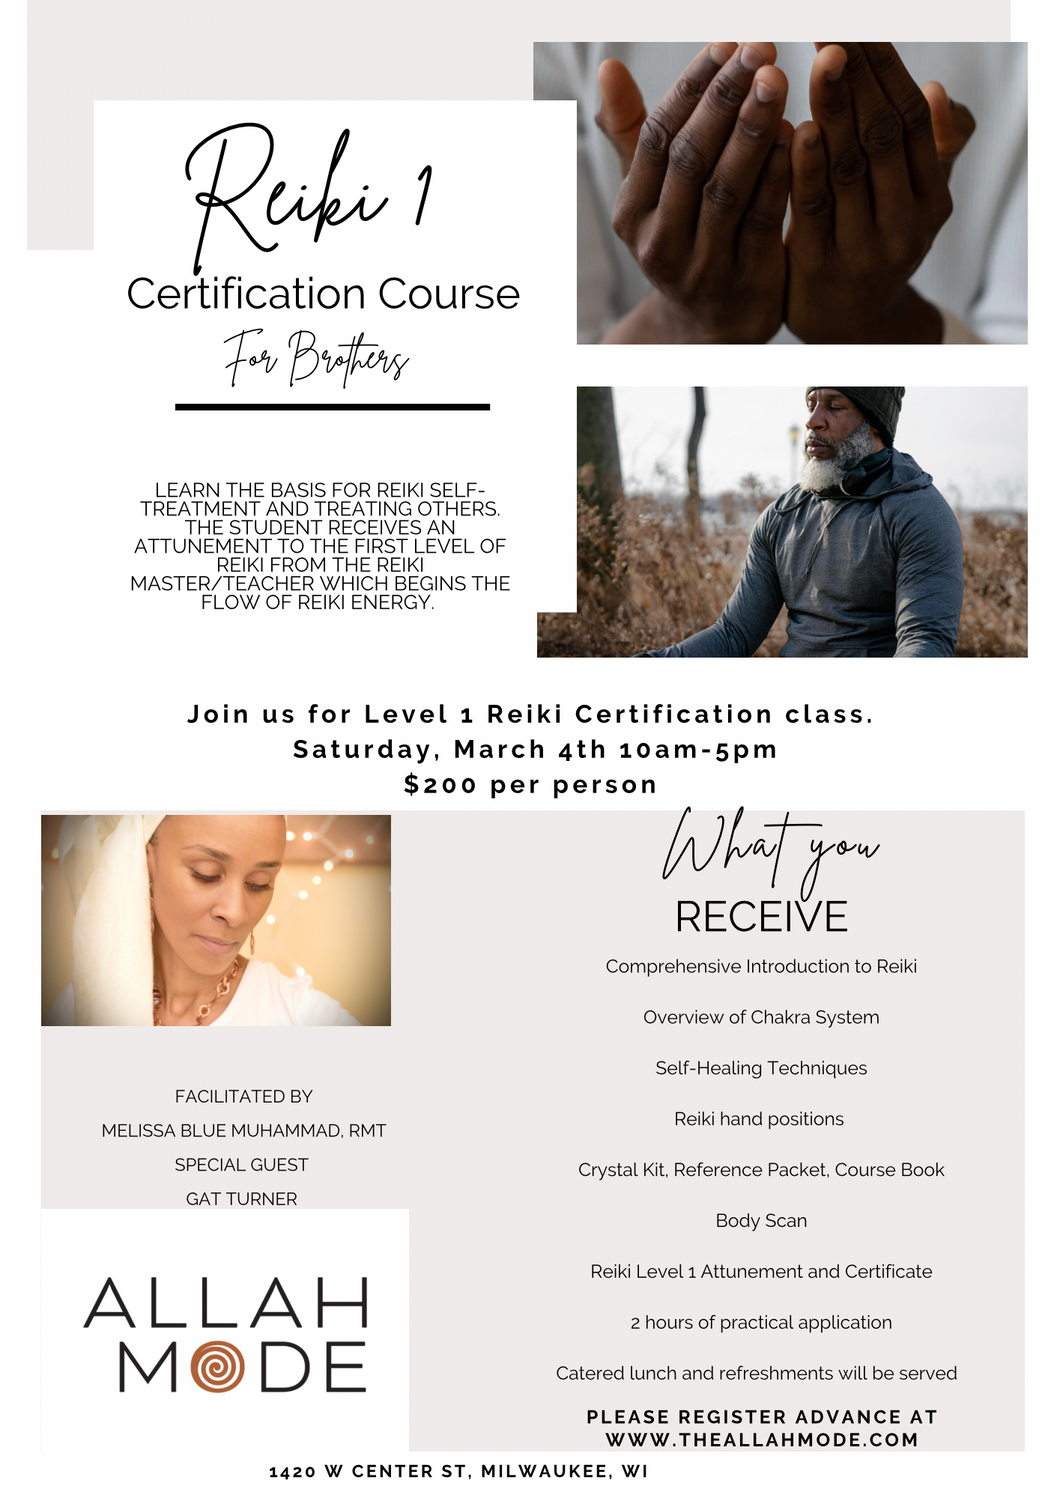 Reiki Level 1 Certification Course For Men-March 4th